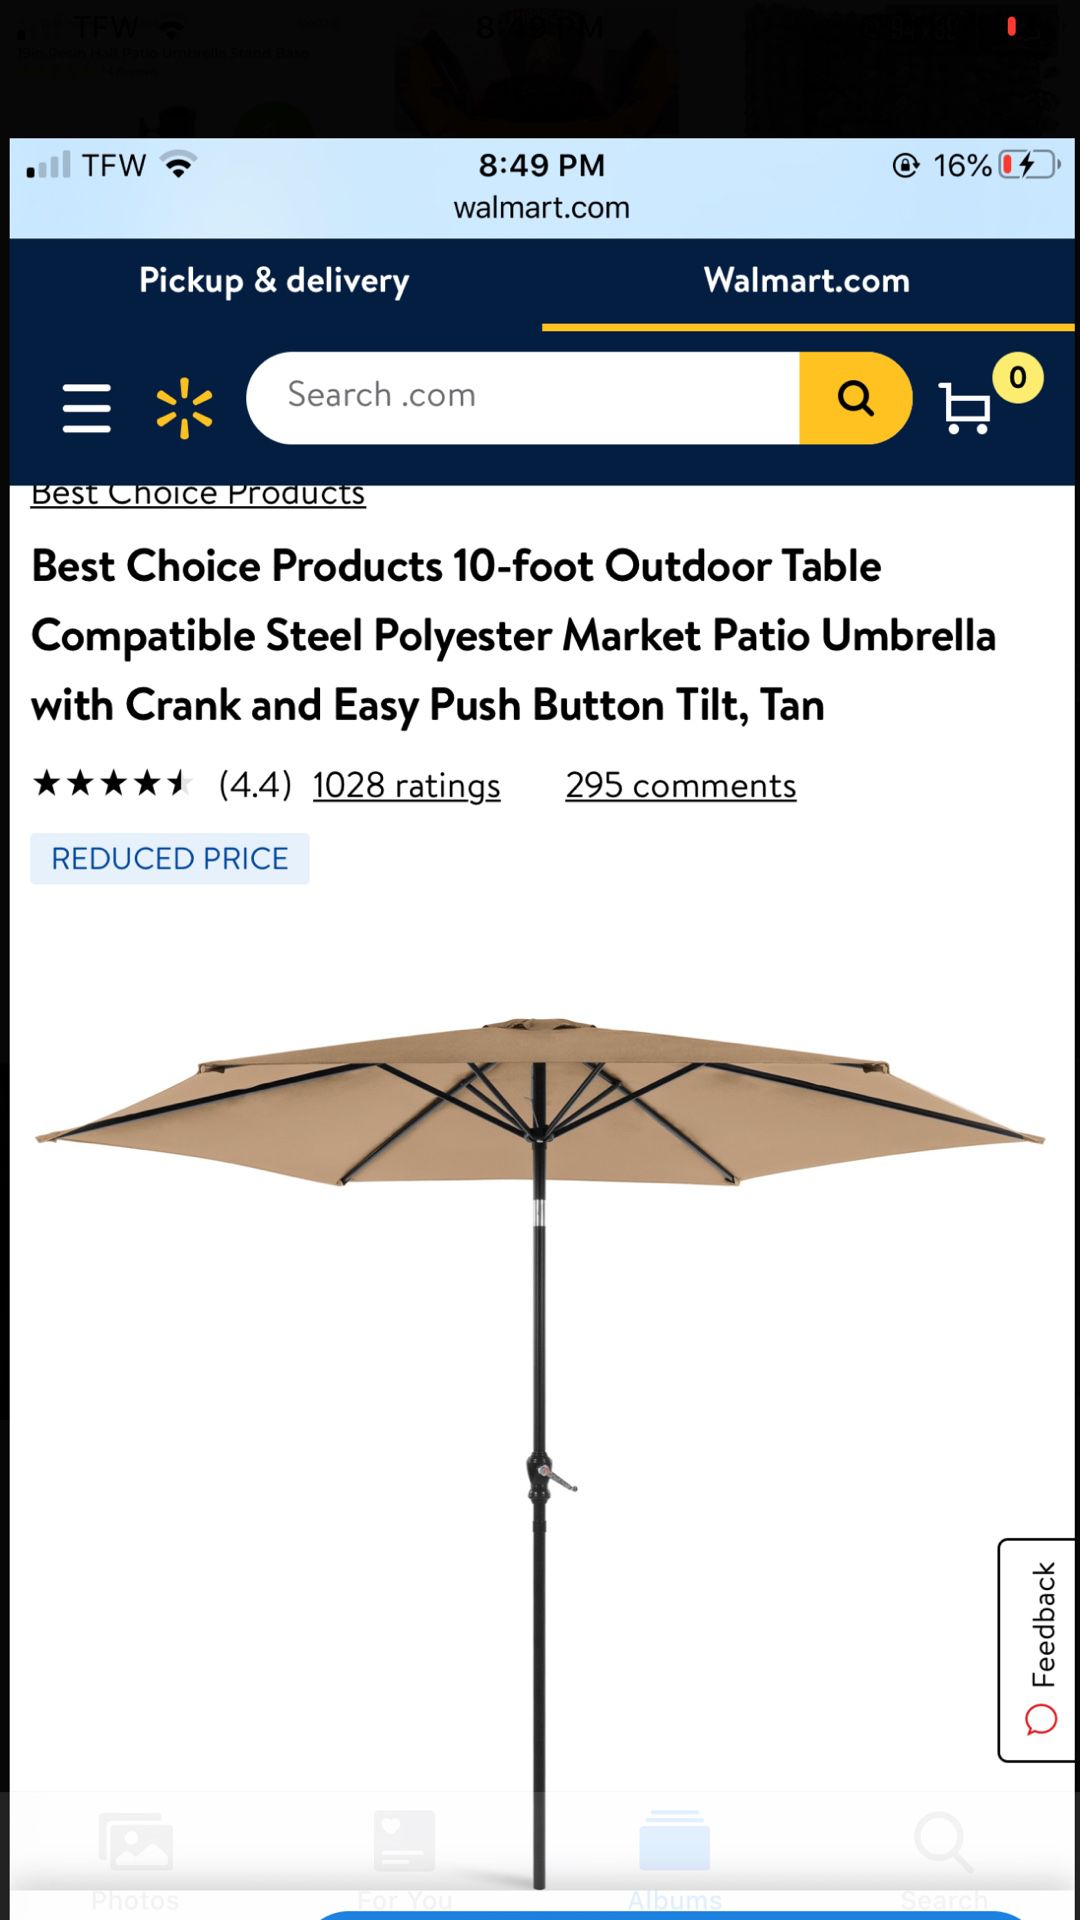 10-foot Outdoor Table Compatible Steel Polyester Market Patio Umbrella with Crank and Easy Push Button Tilt, Tan